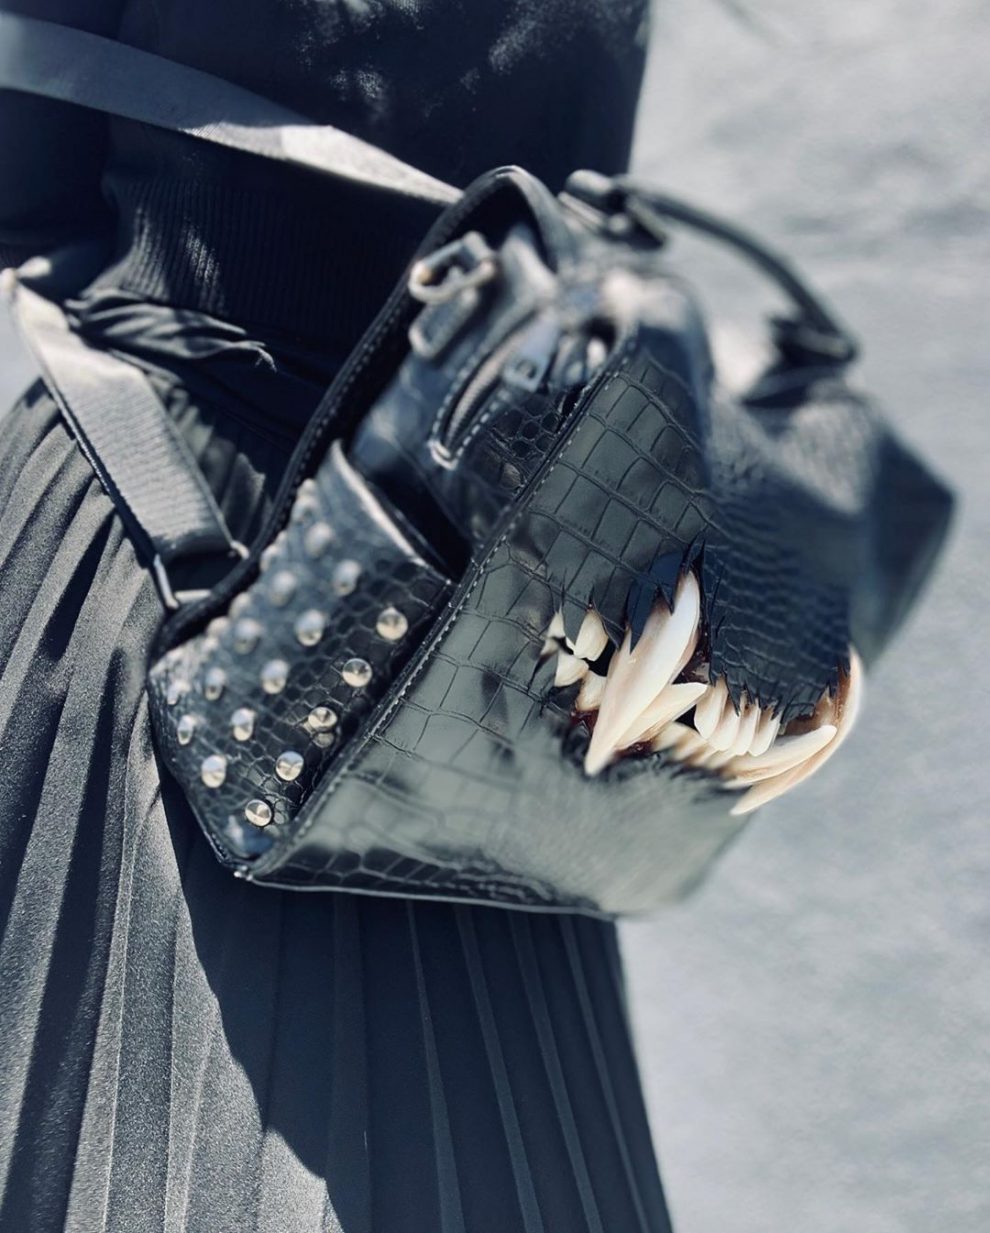 Bare Gruesome Fangs And More With Japanese Designer’s Awesome Creature ...